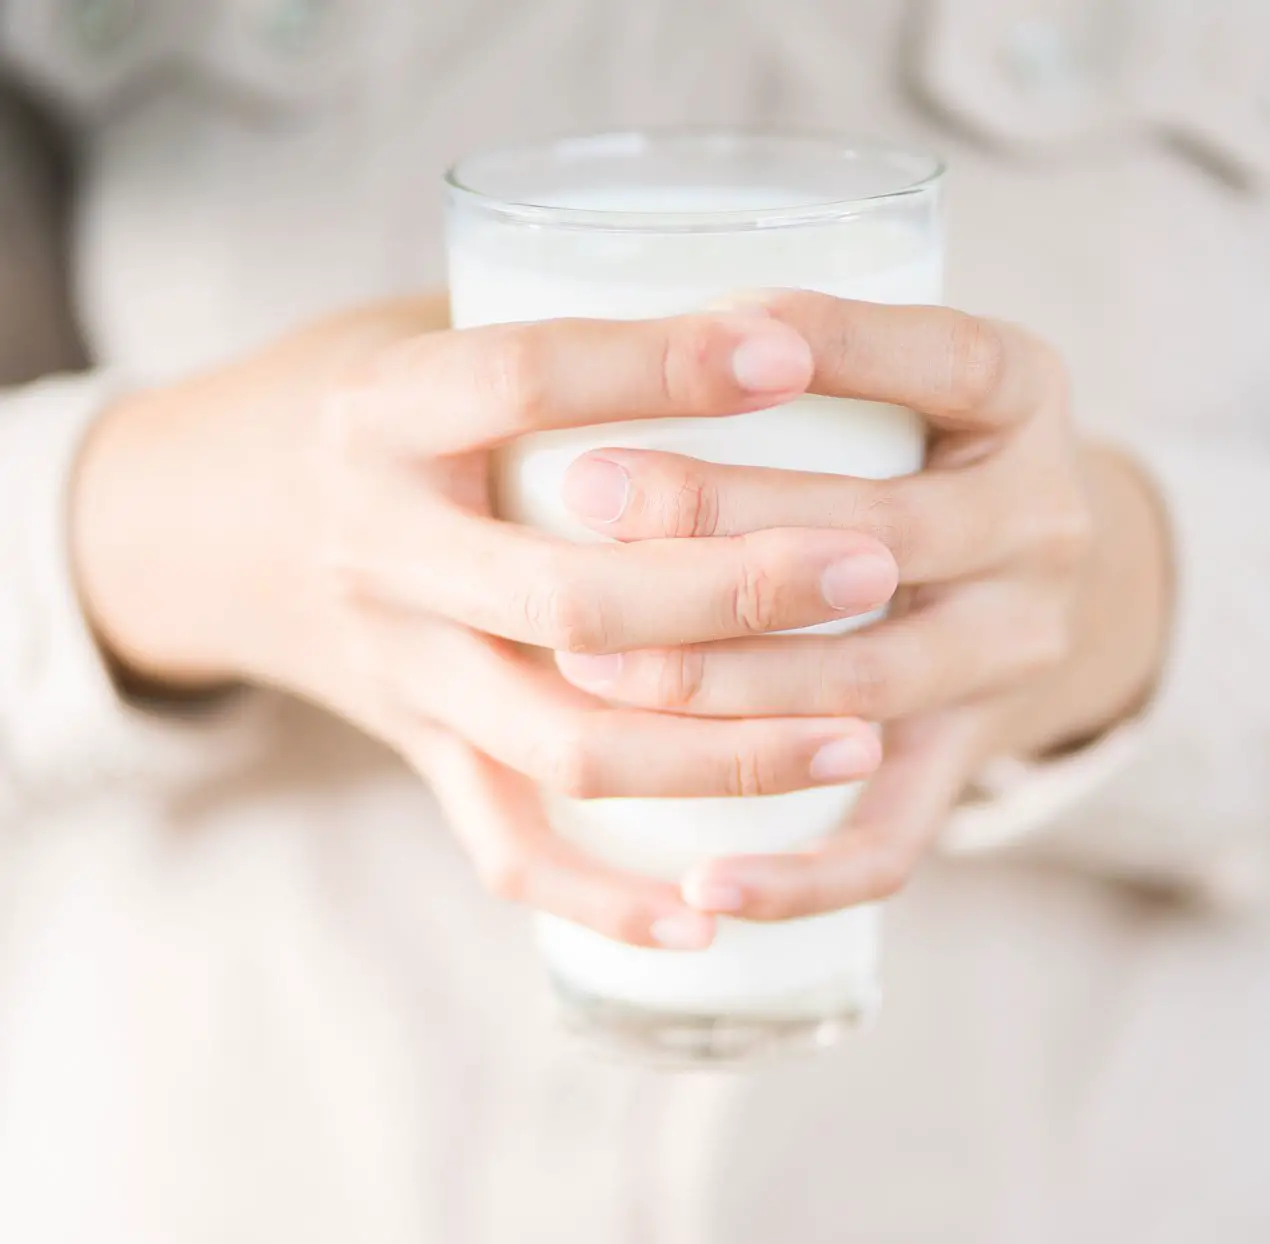 Breast Cancer News: Does Dairy Cause Breast Cancer?